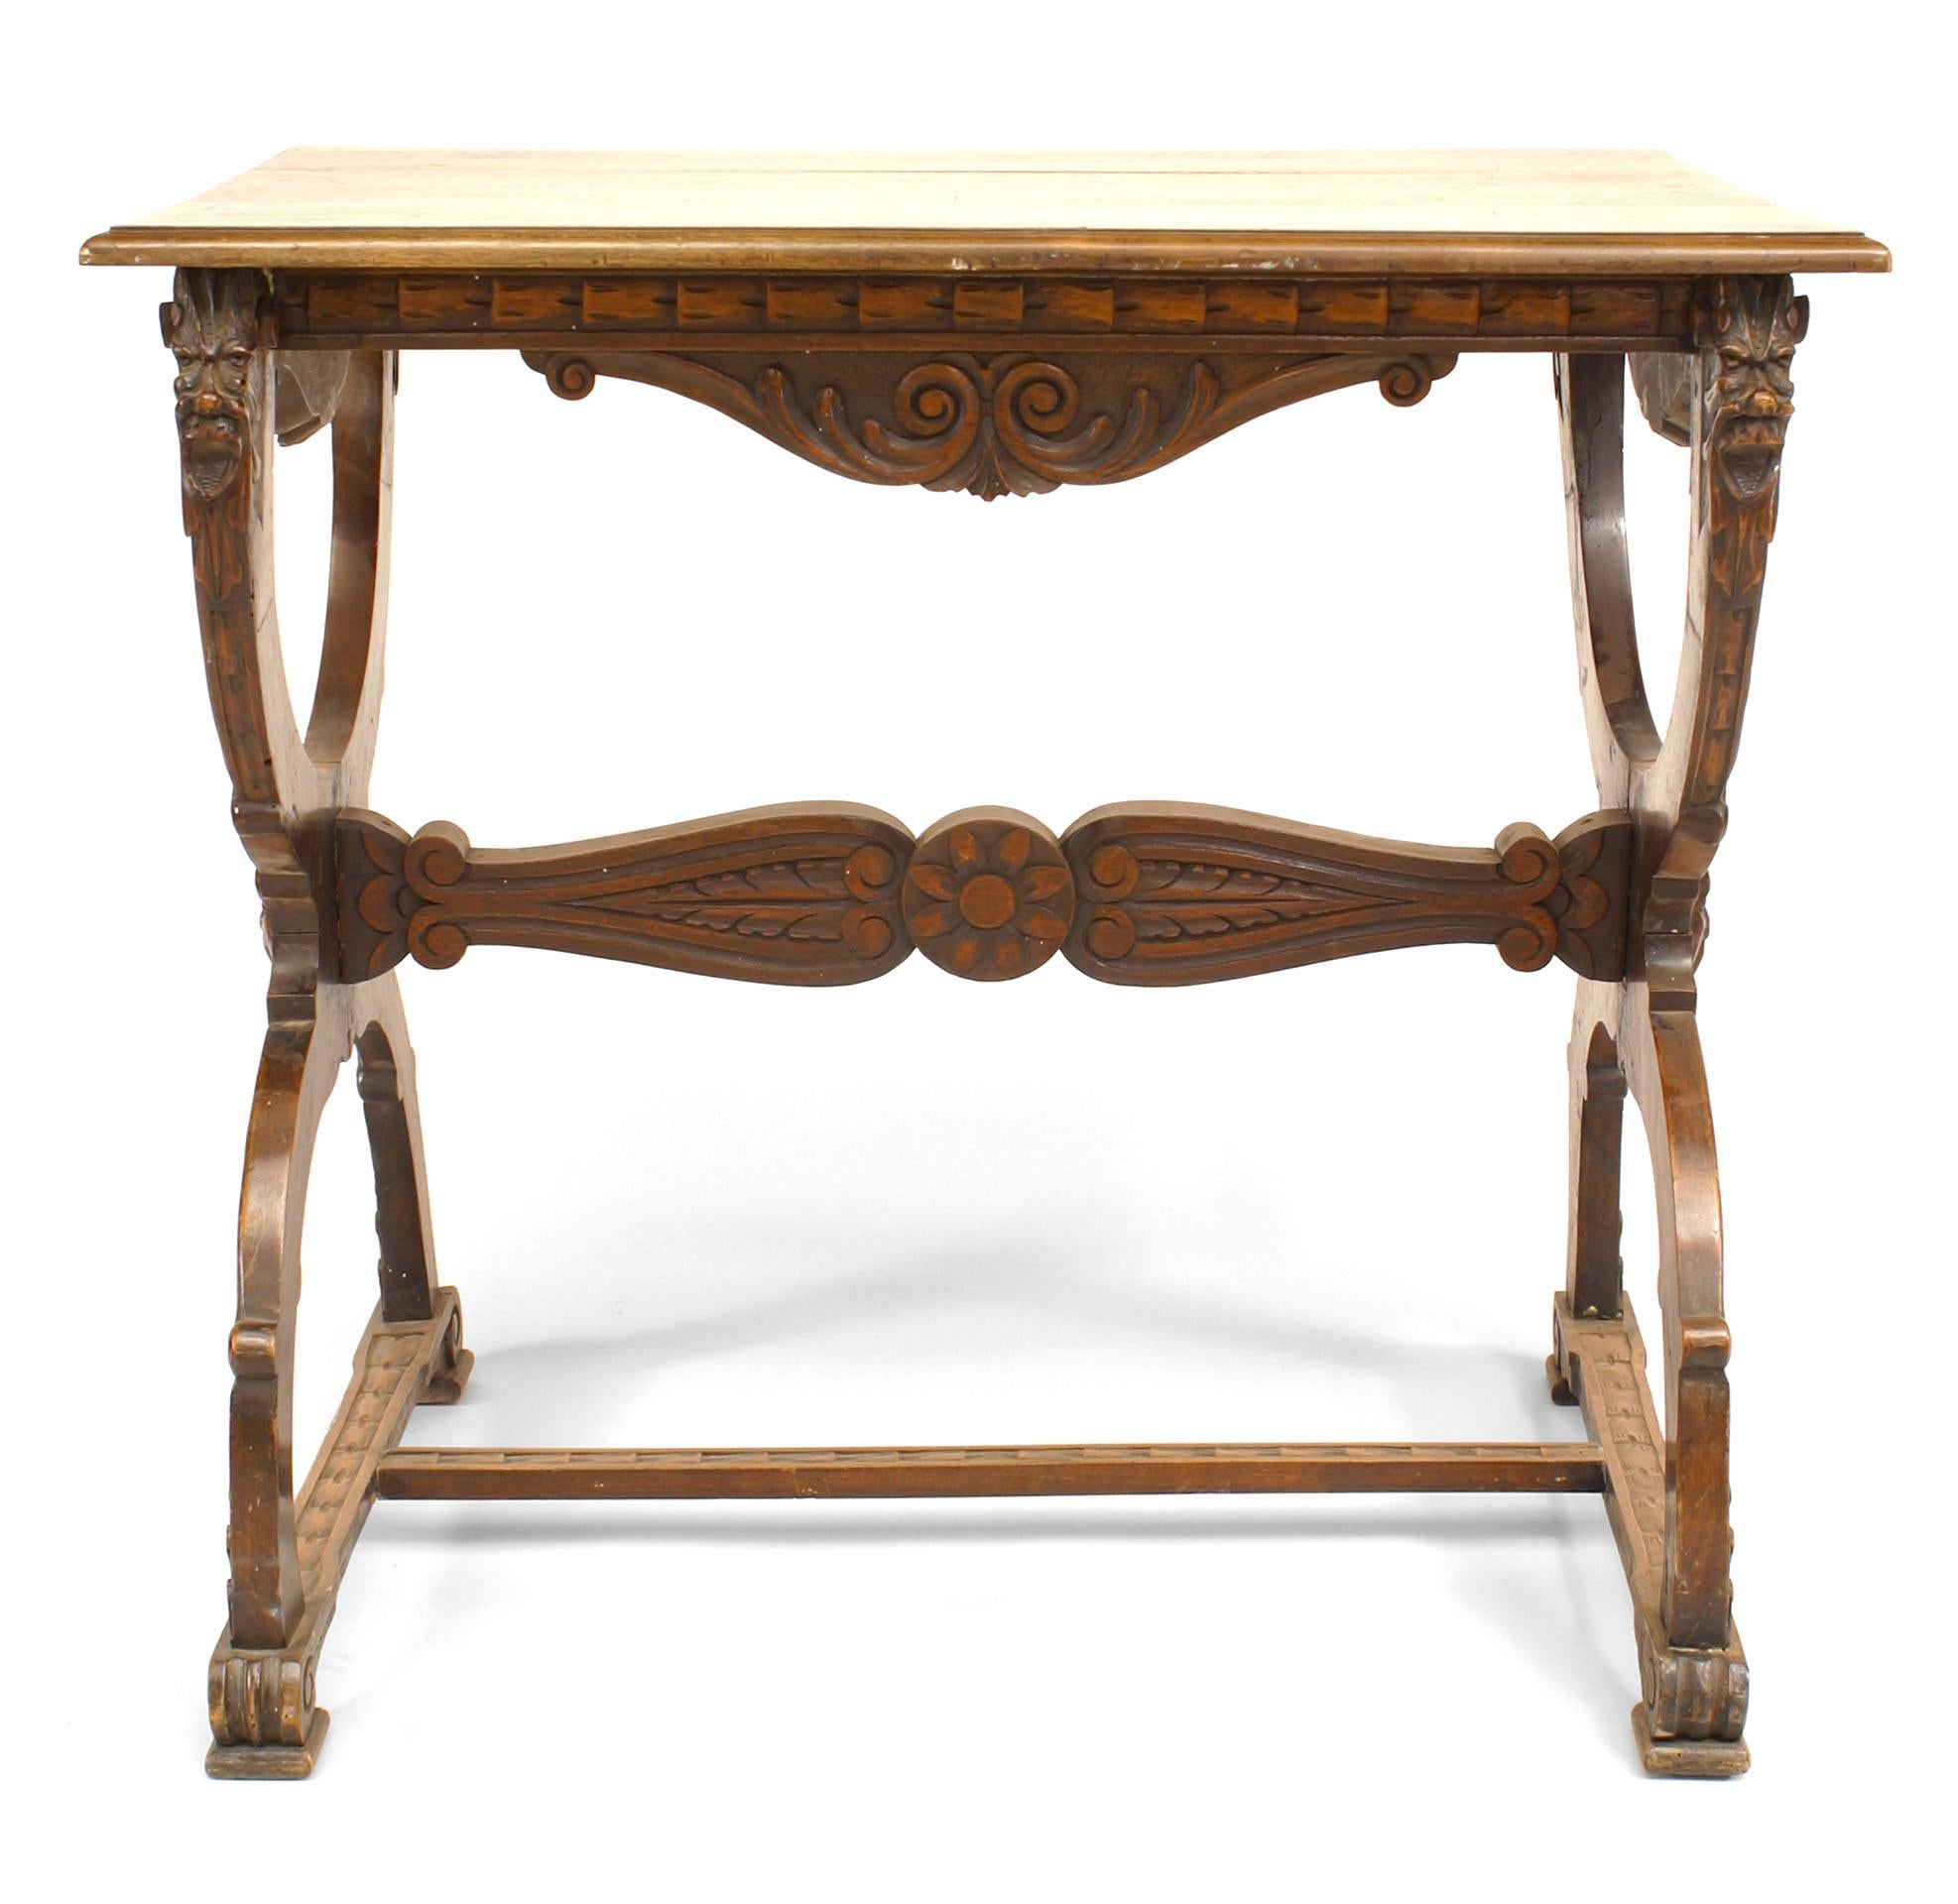 Italian Renaissance-style (19/20th Century) walnut carved cross leg end table with 2 stretchers
